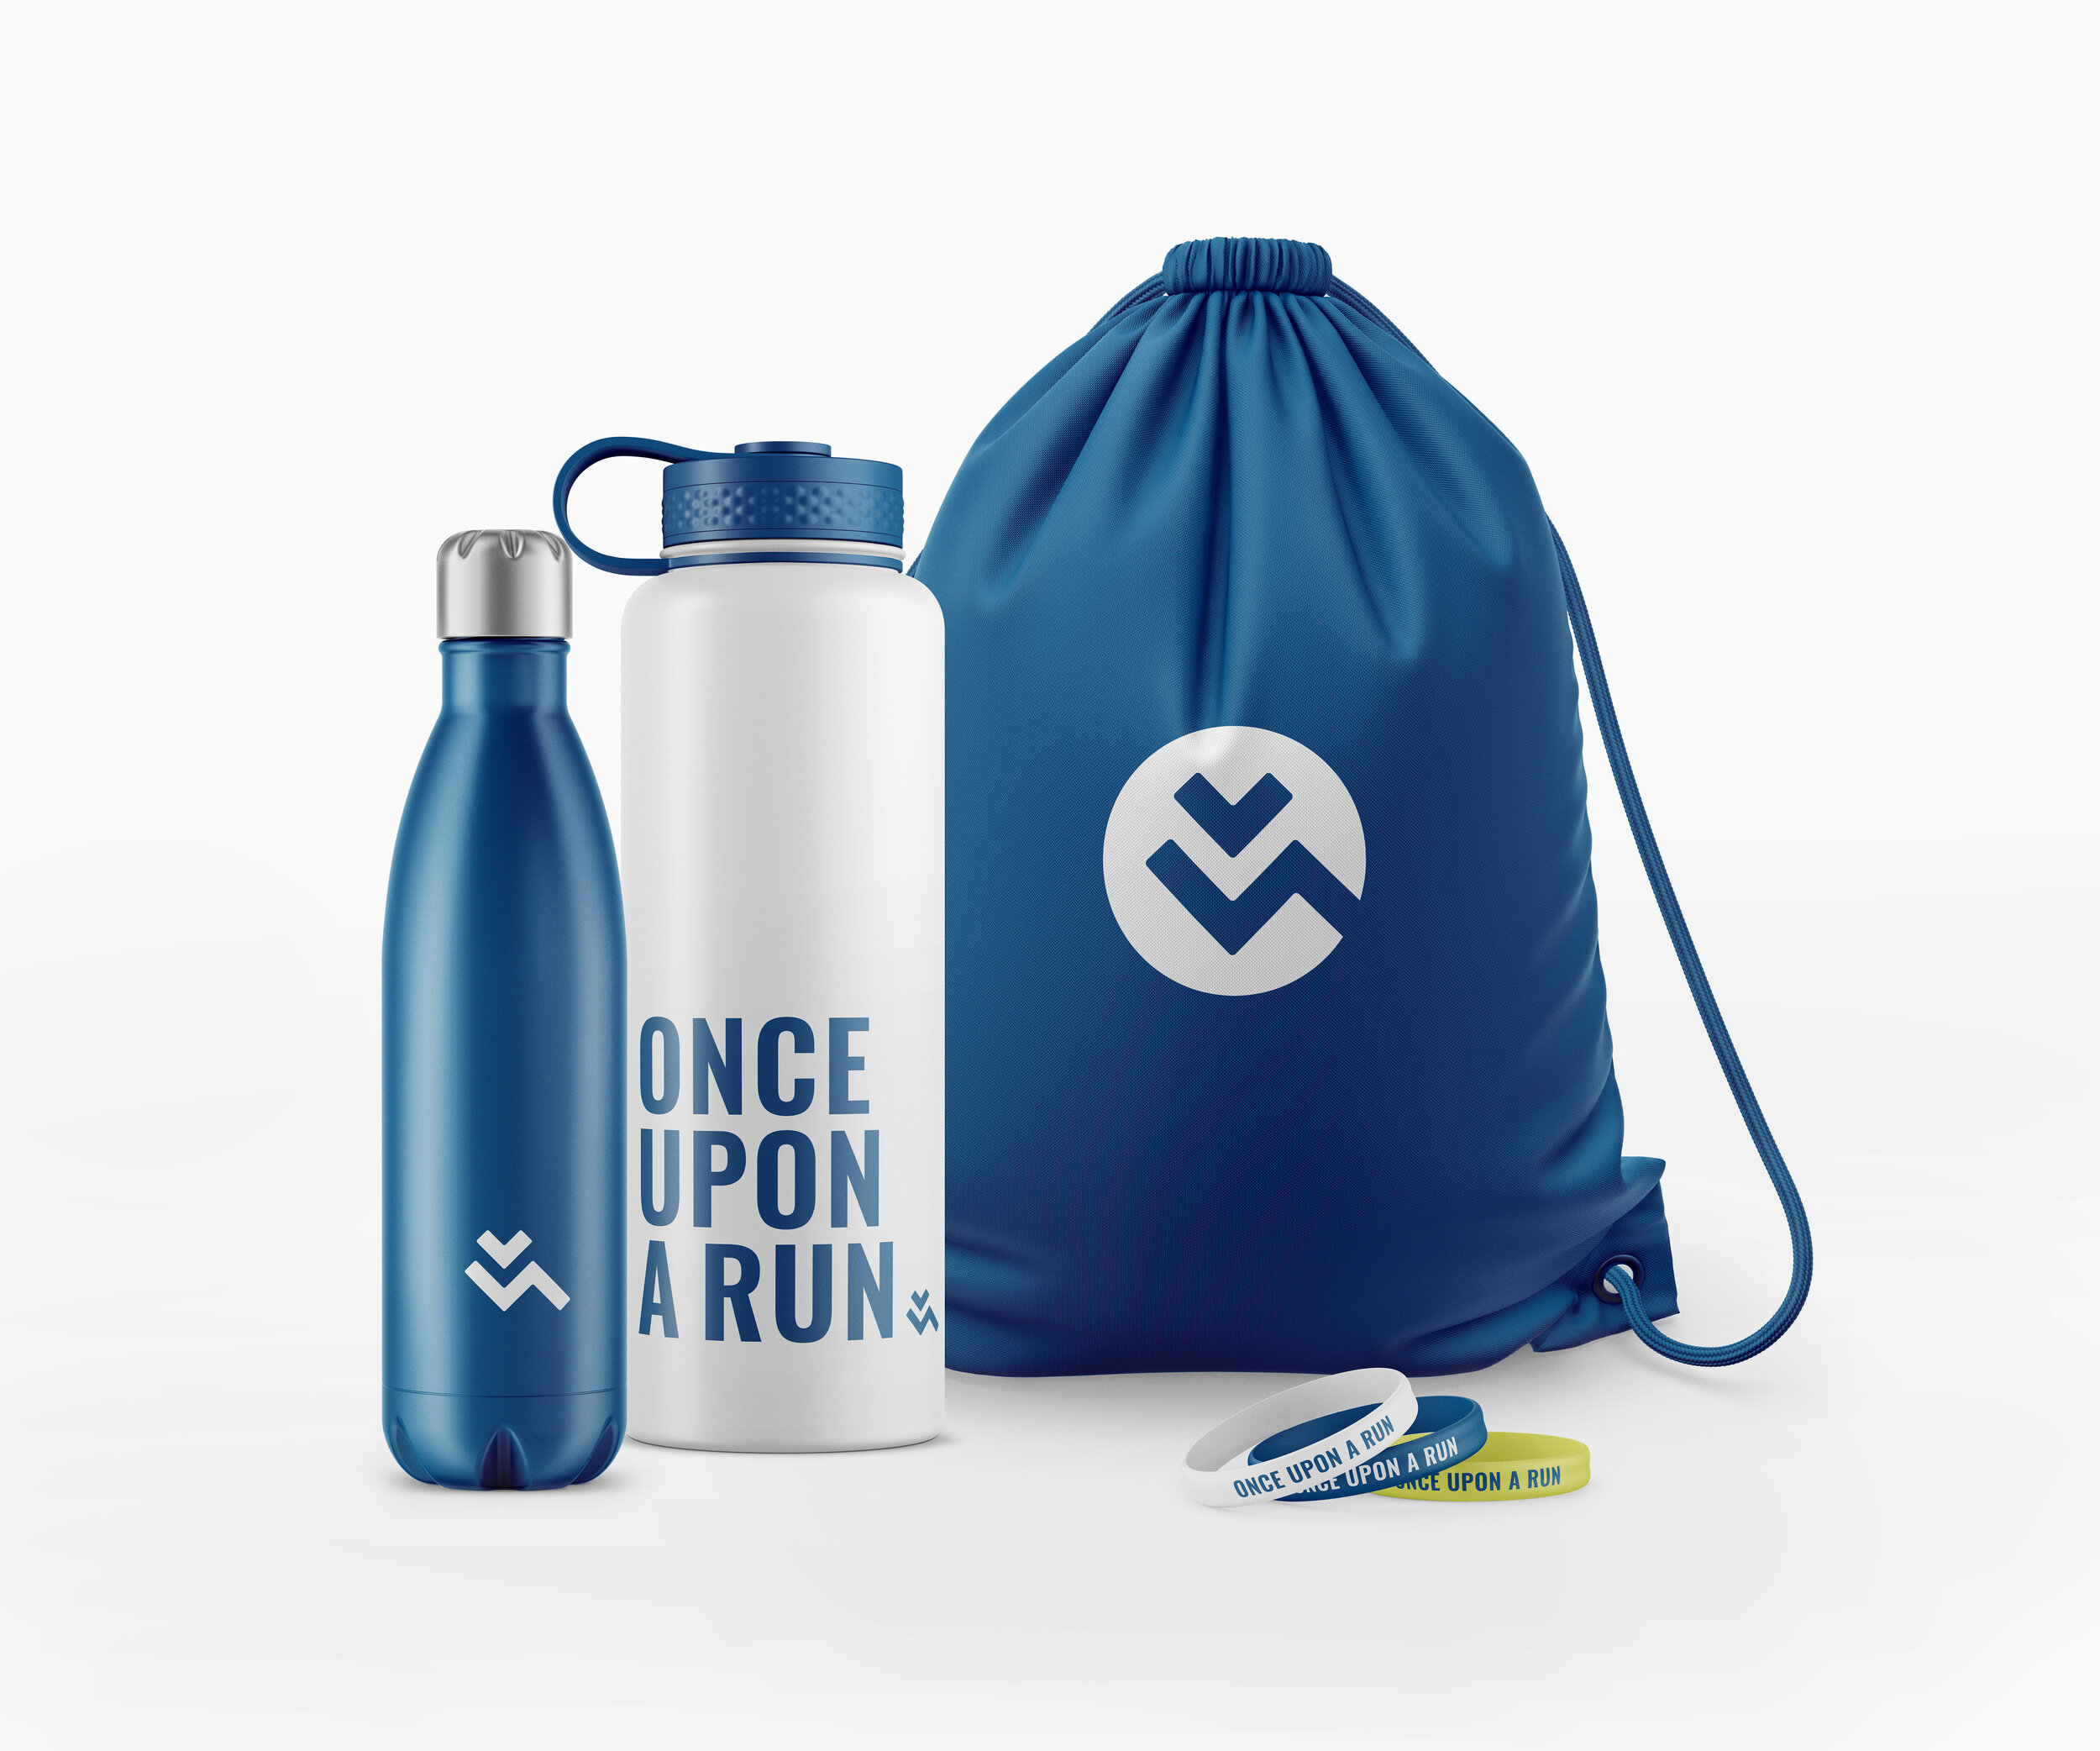 Blue and White Fitness Logo Water Bottles, Gym Bag and Athletic Silicone Bracelet for Running Coach Vic Aguilar